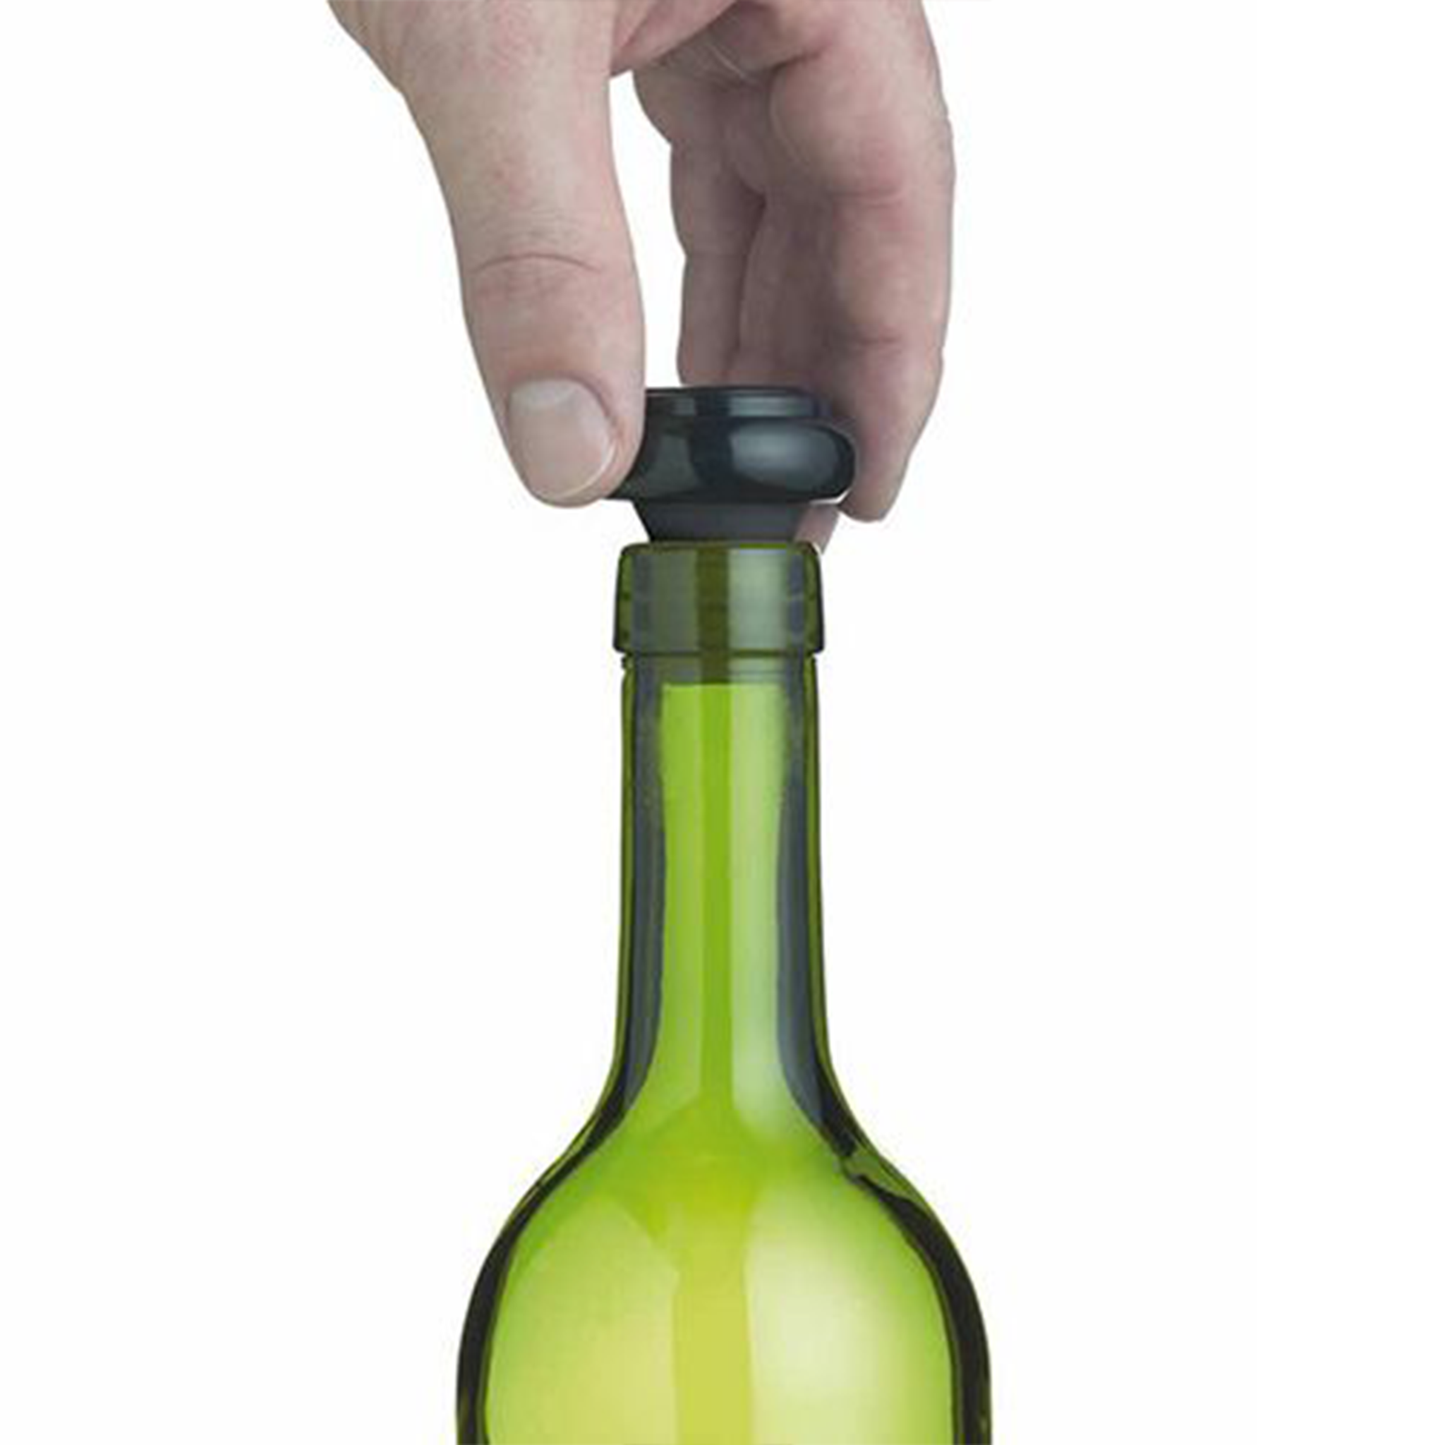 one of the bottle sealers being inserted into the top of the bottle